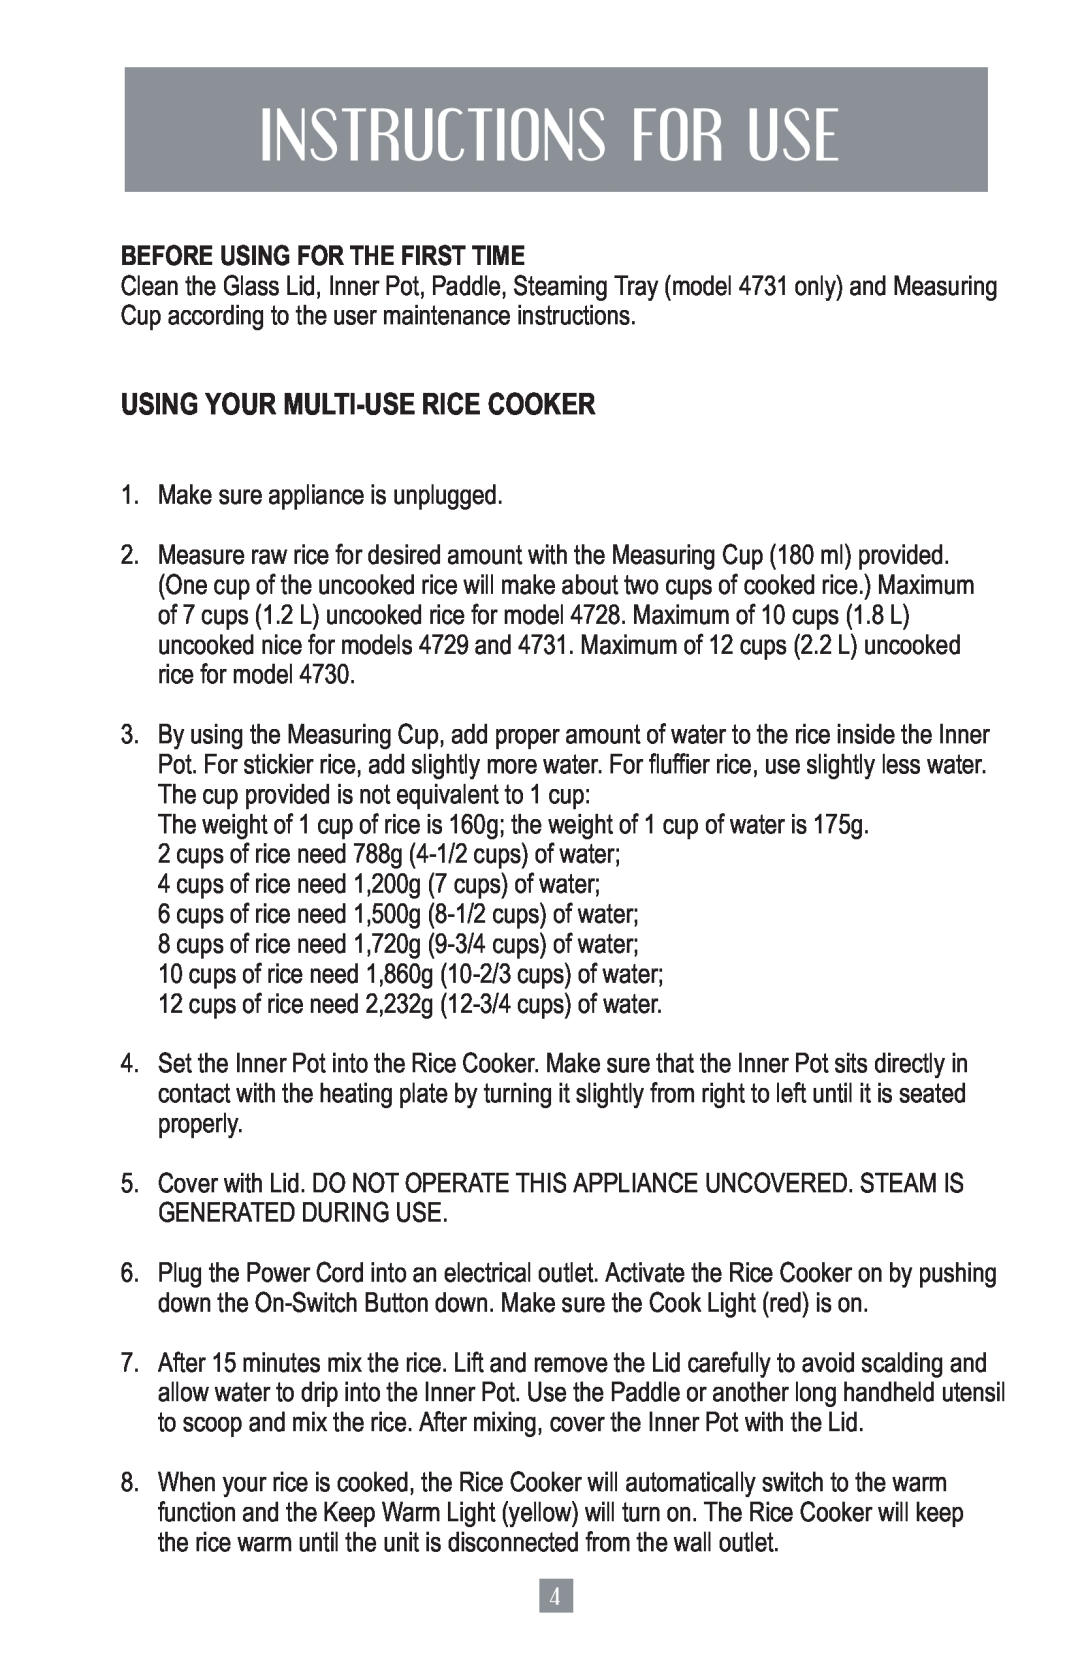 Oster 4728 instruction manual Instructions For Use, Using Your Multi-Userice Cooker, Before Using For The First Time 